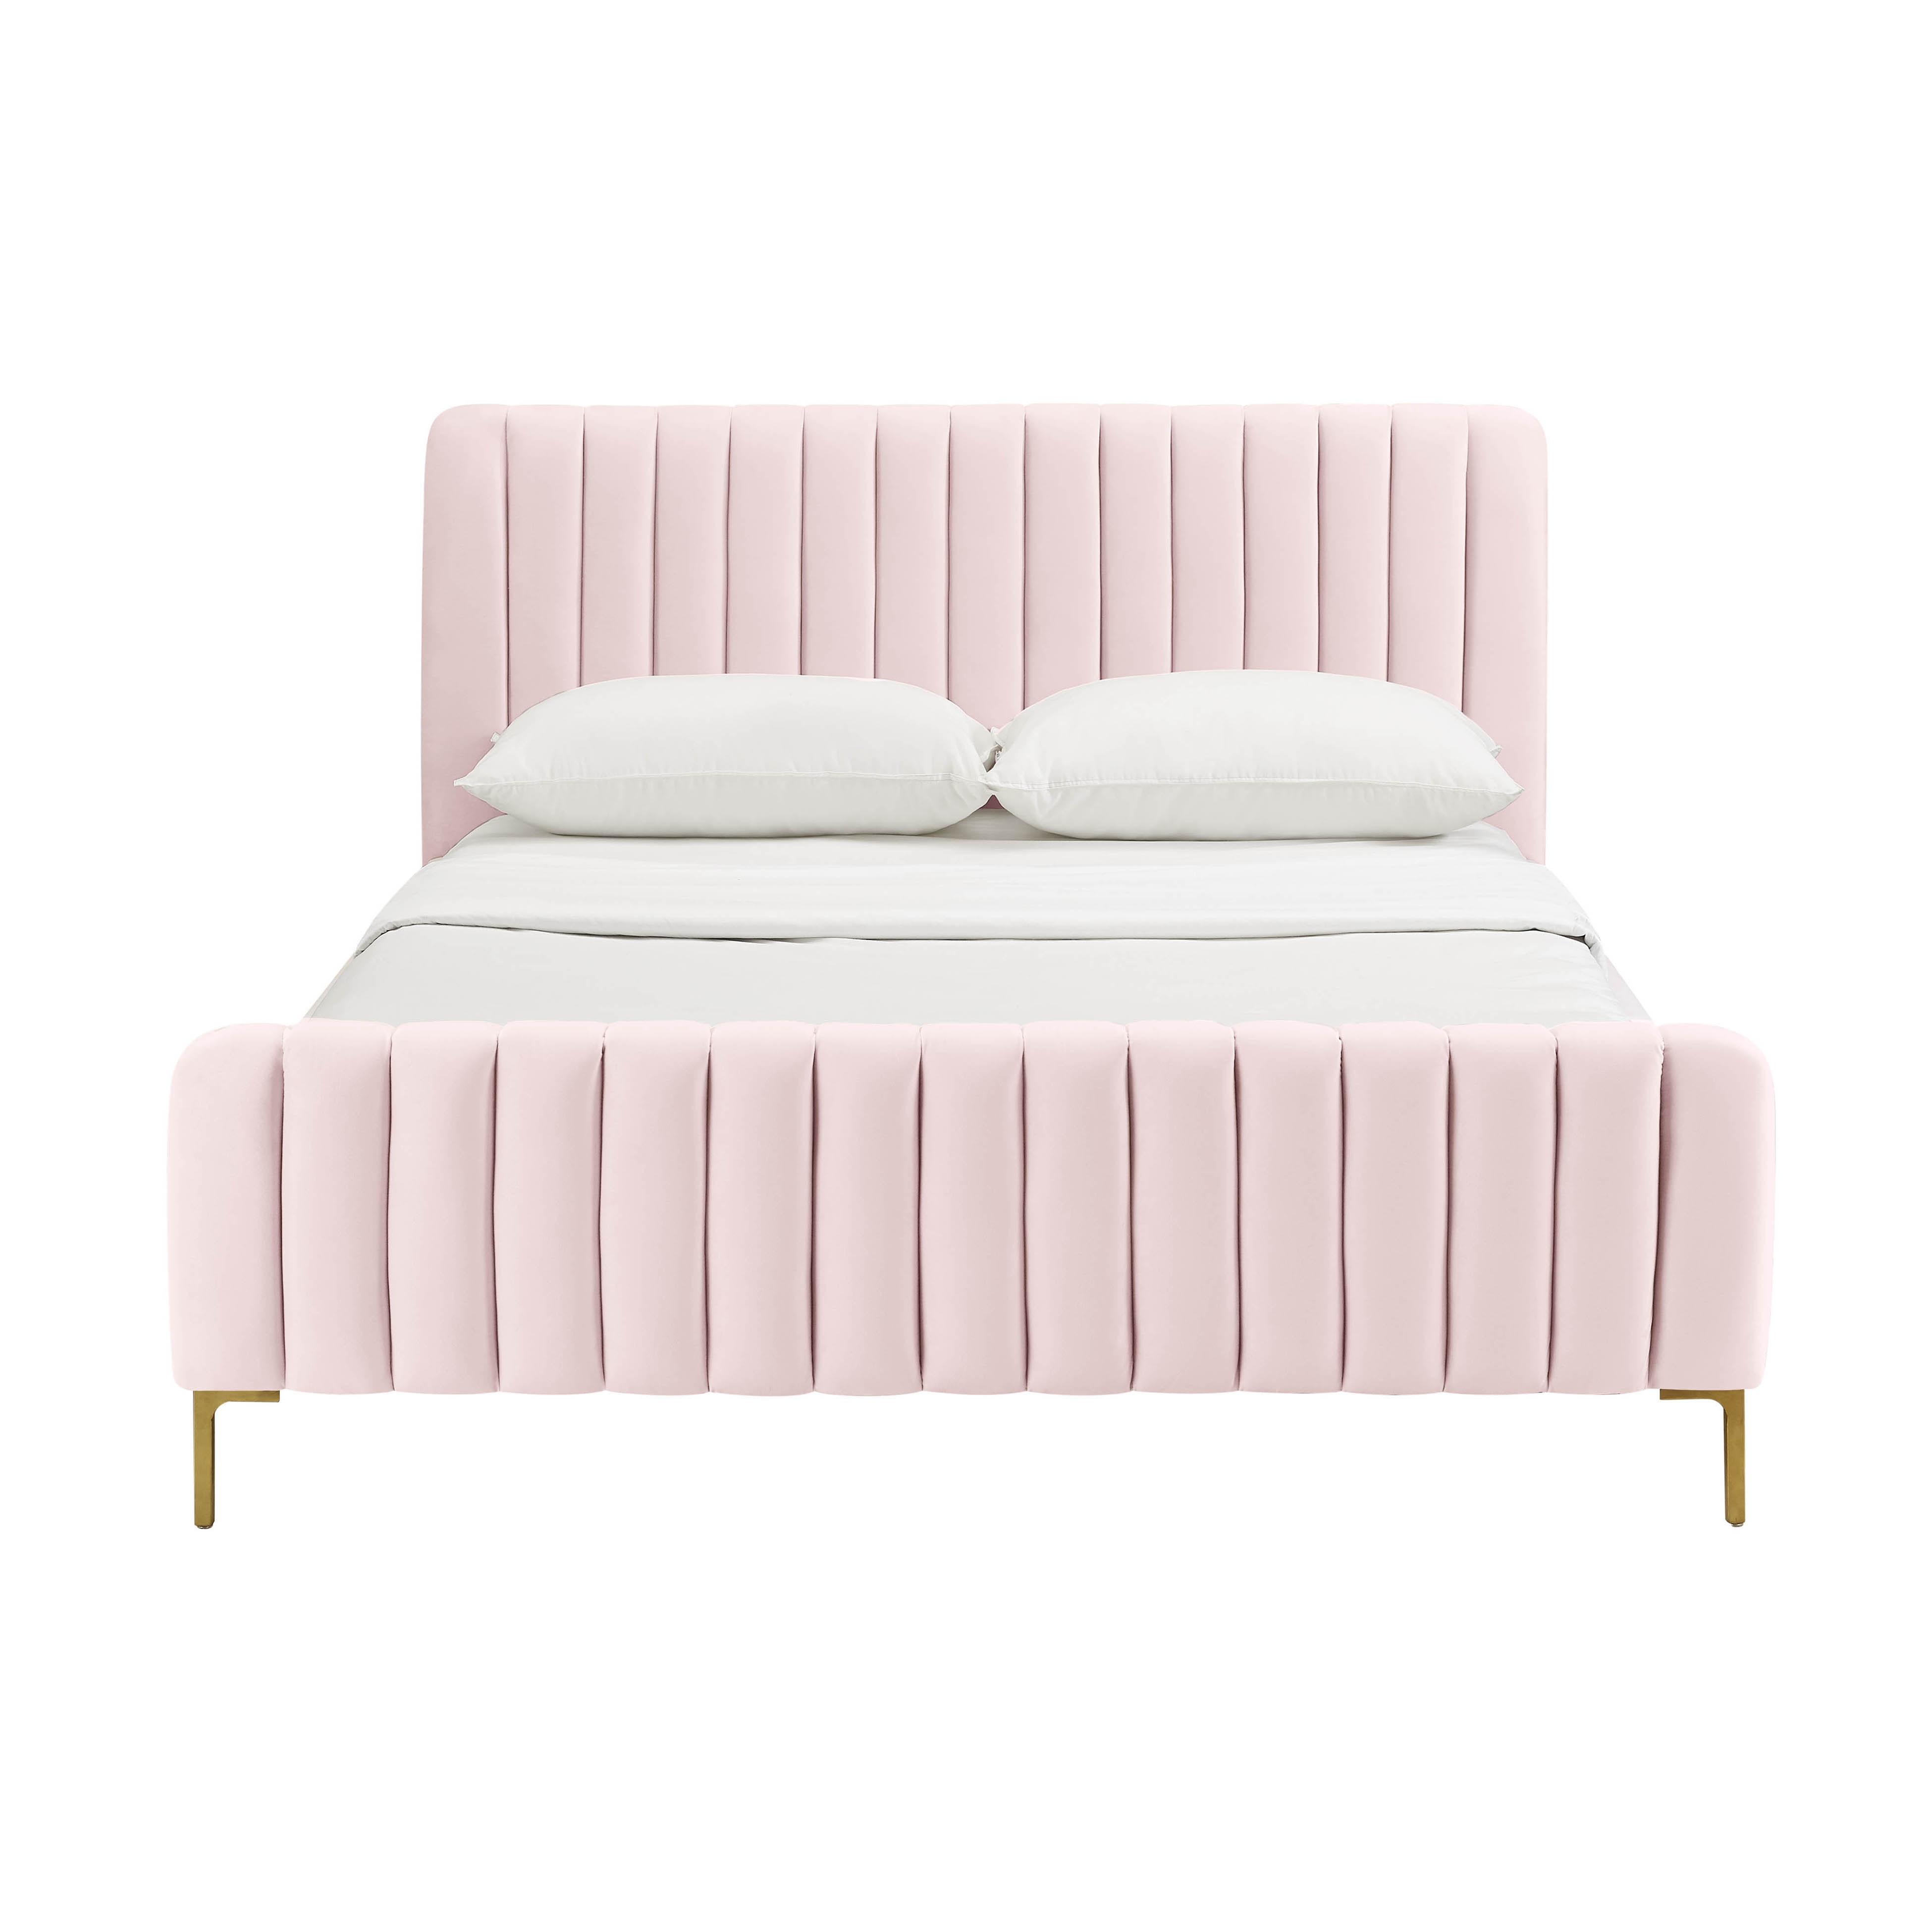 Angela Blush Bed in Queen - Image 3